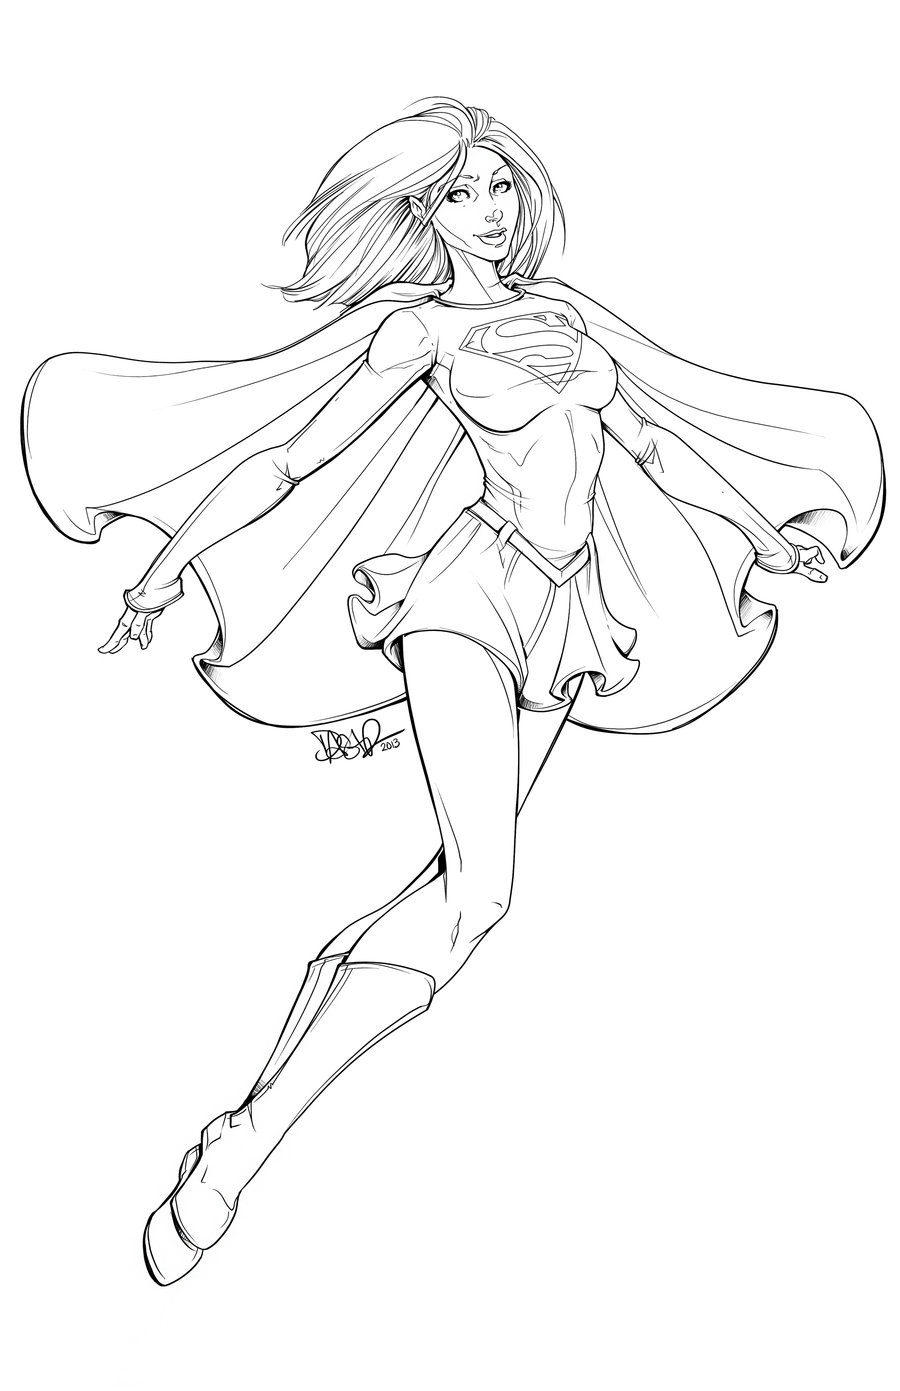 28+ dc super hero girls coloring pages Every girls is a super hero sometimes coloring pages printable